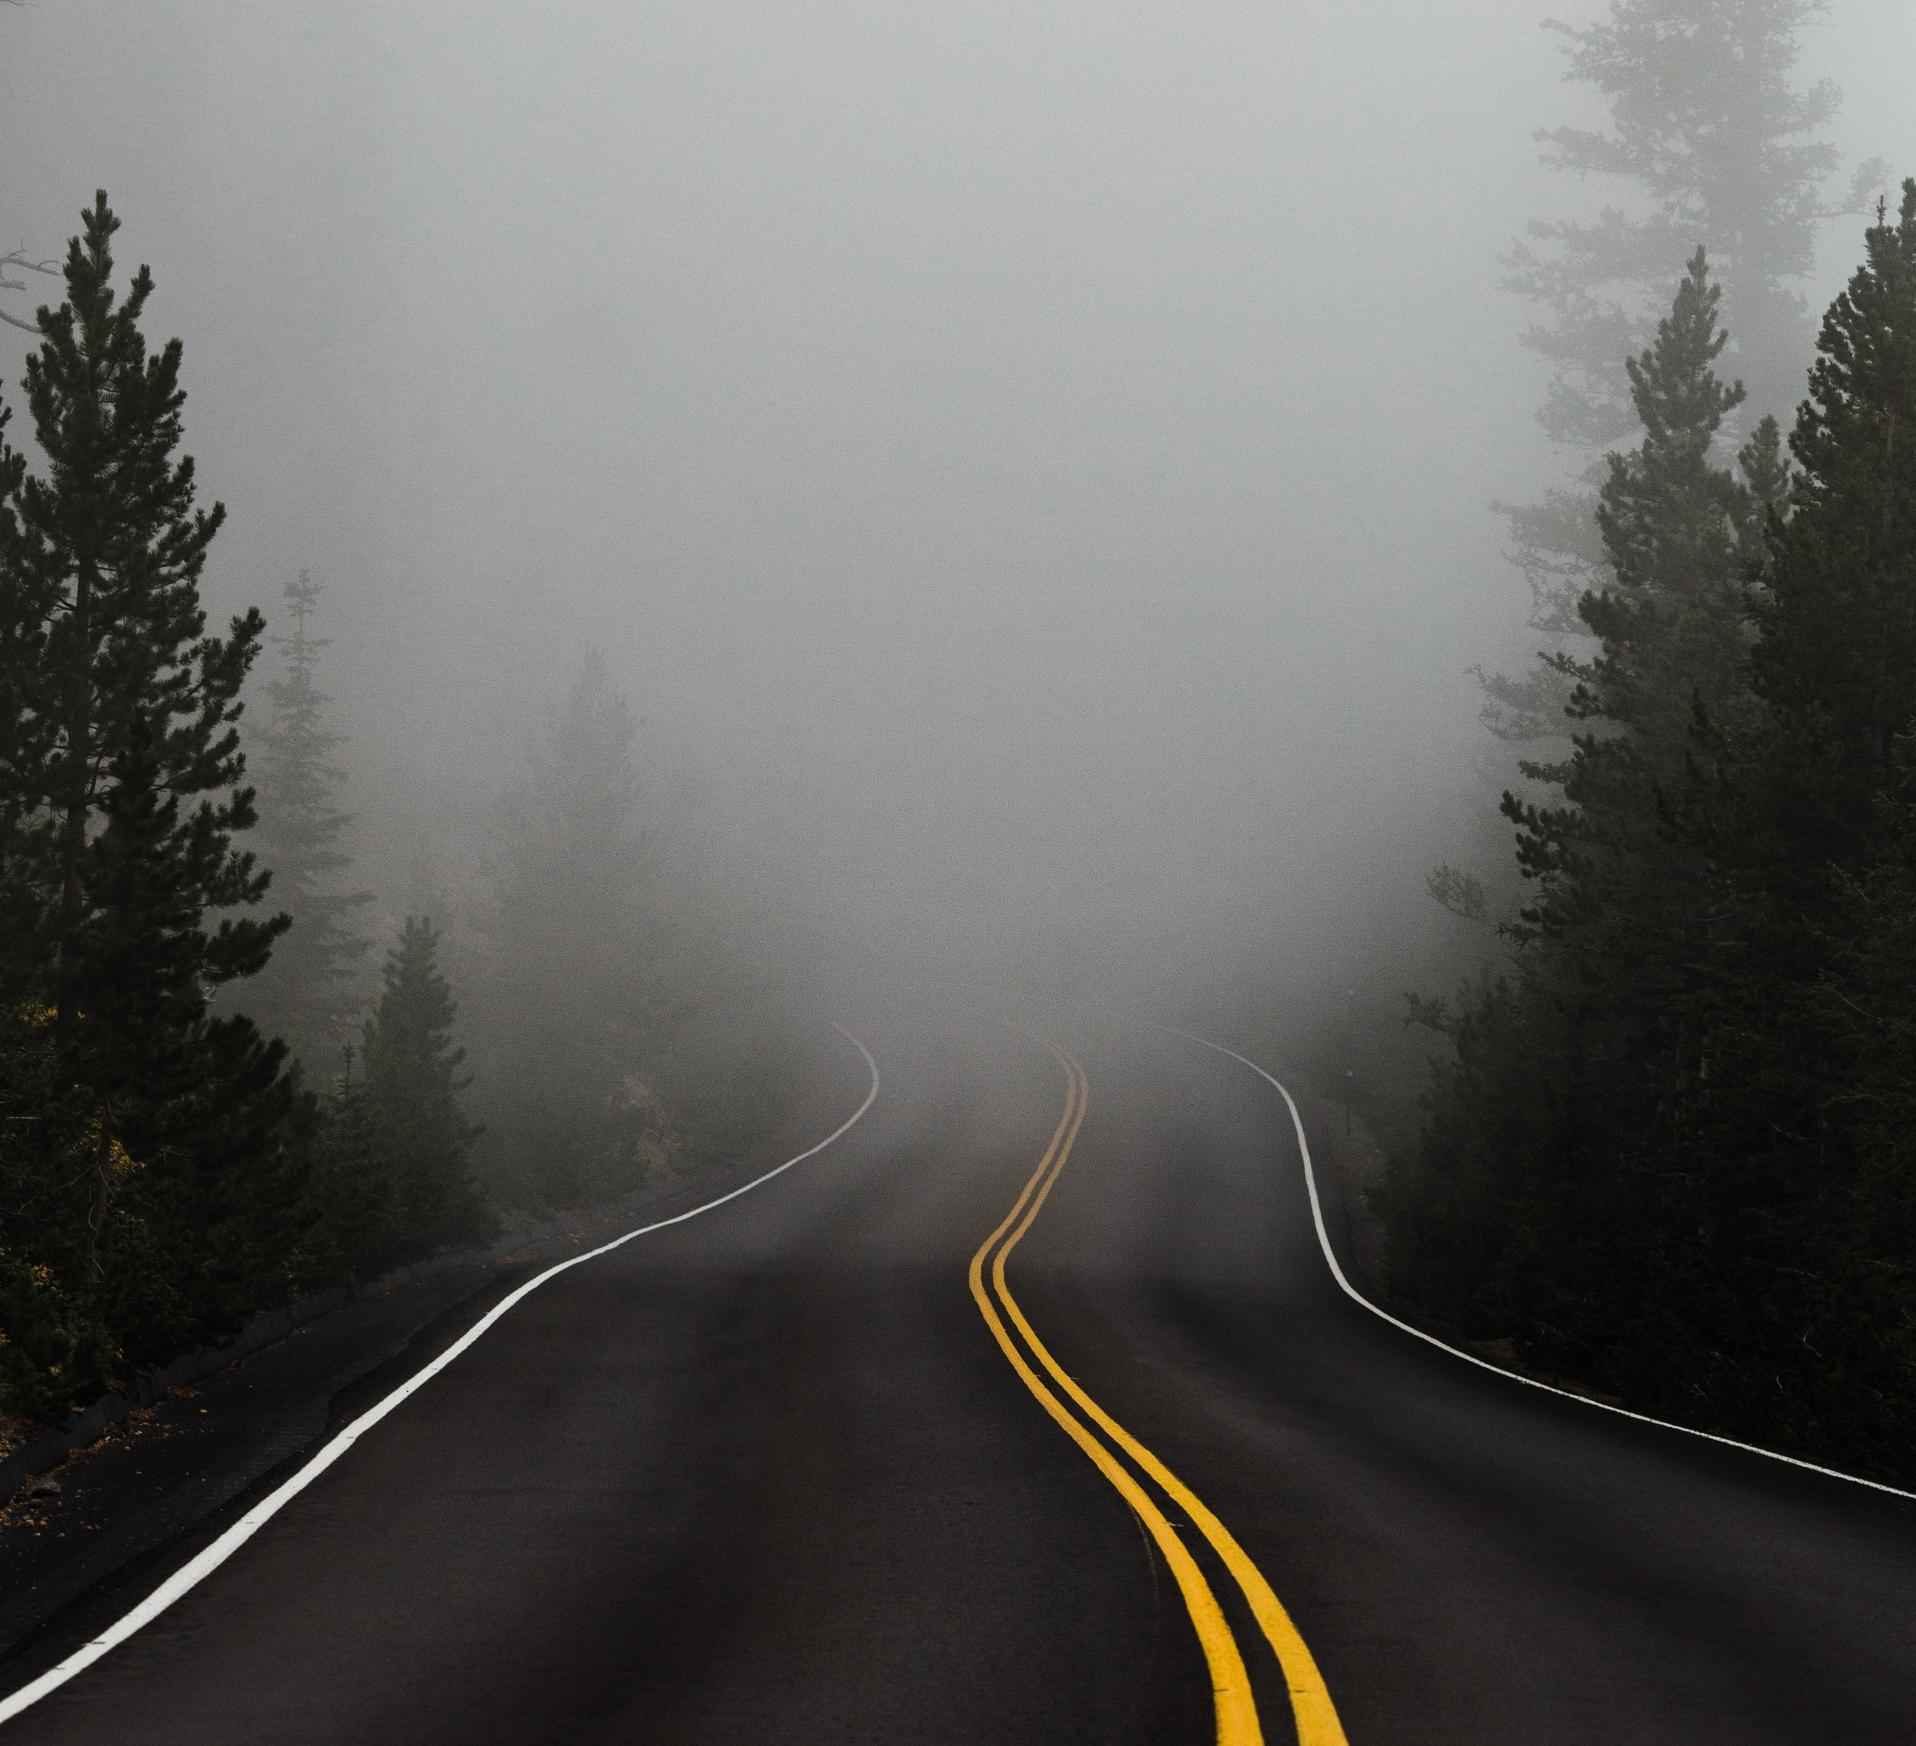 Image of a windy road disappearing into fog.